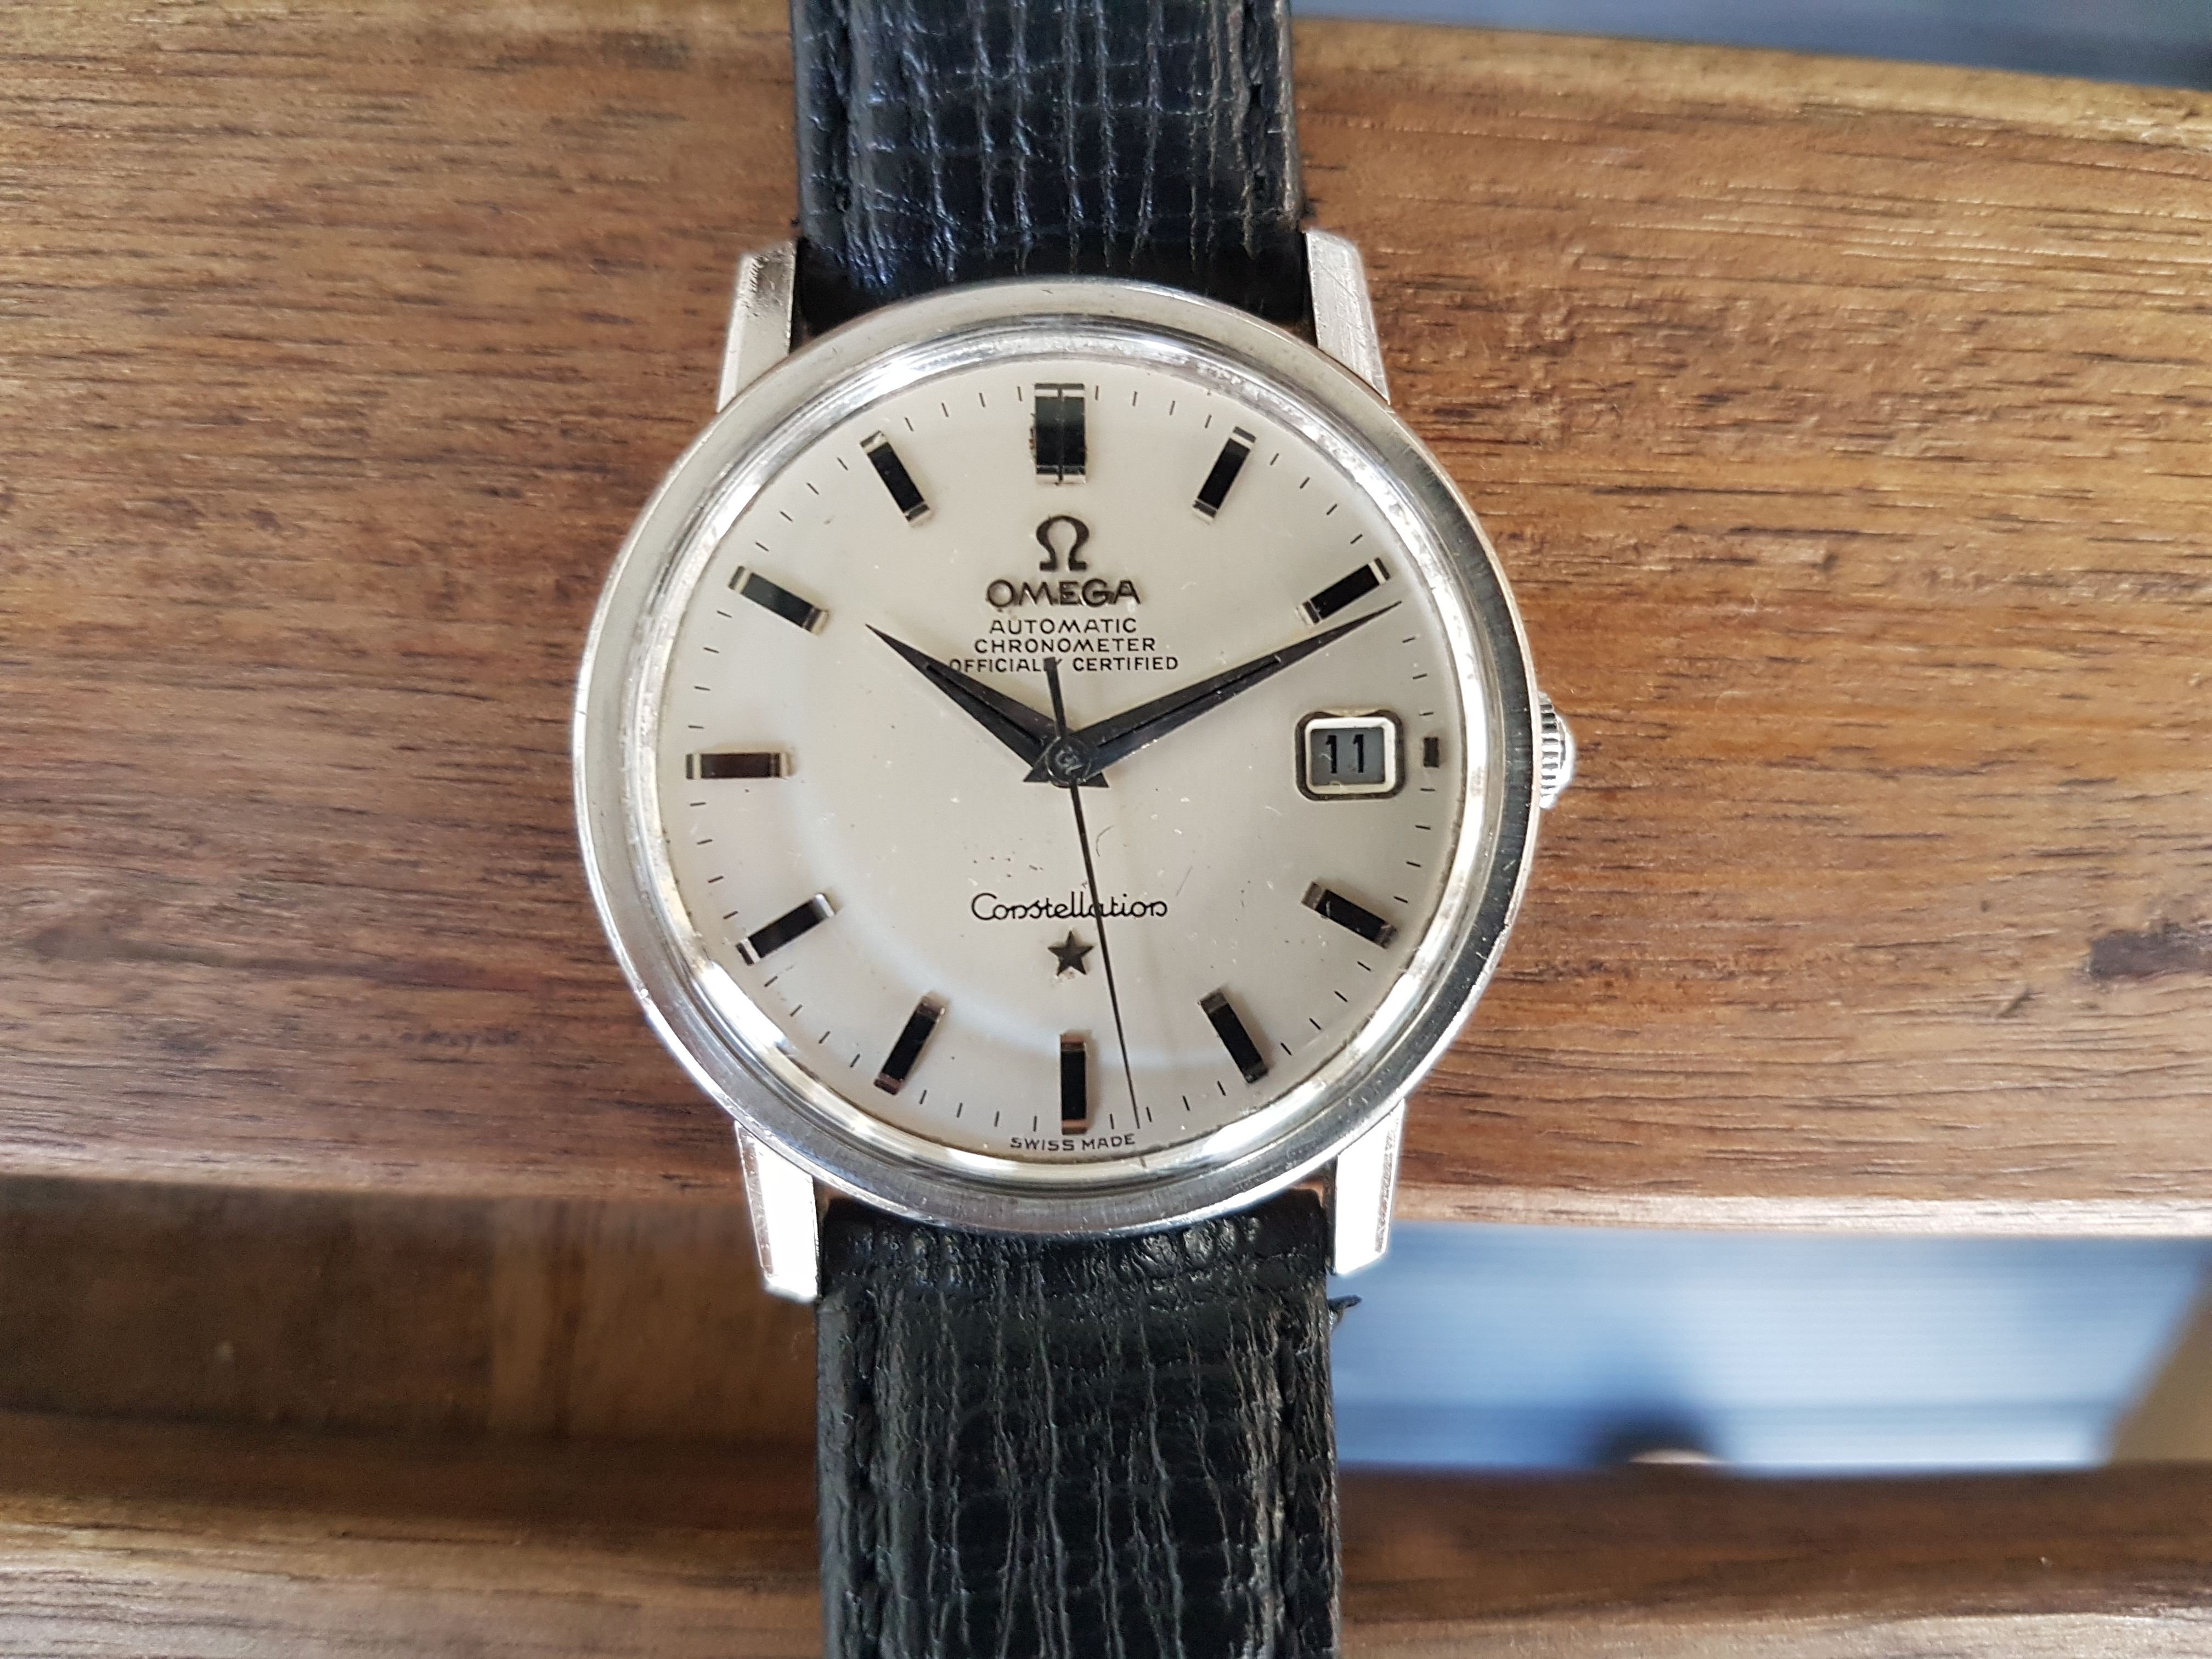 Help with identifying vintage omega 